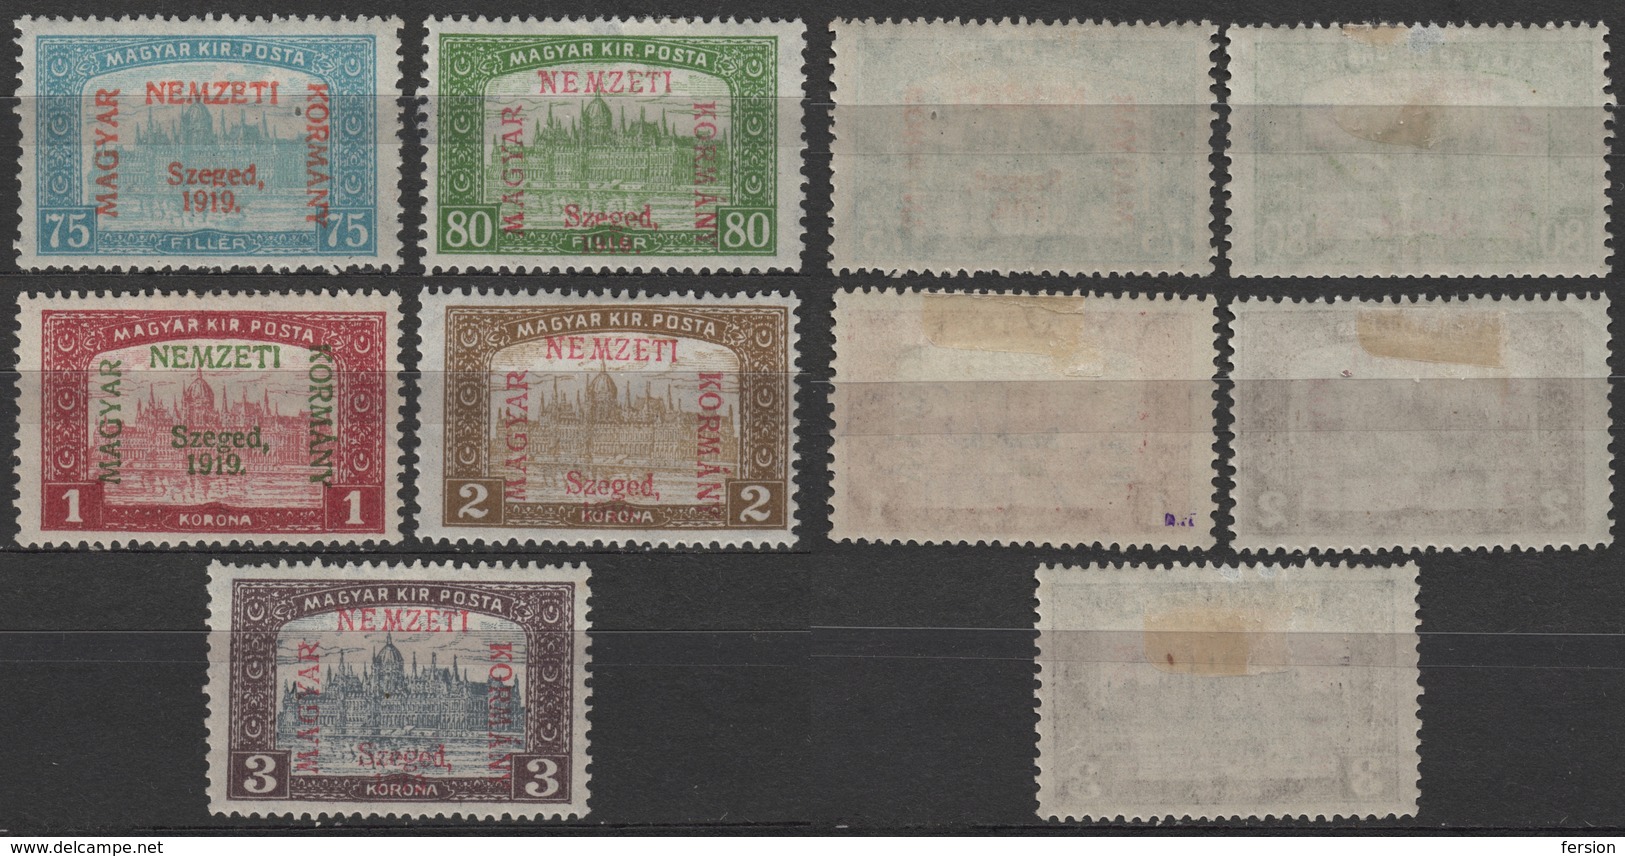 1919 France Occupation Local SZEGED - Hungary - Parliament Overprint - MH LOT - Nuevos